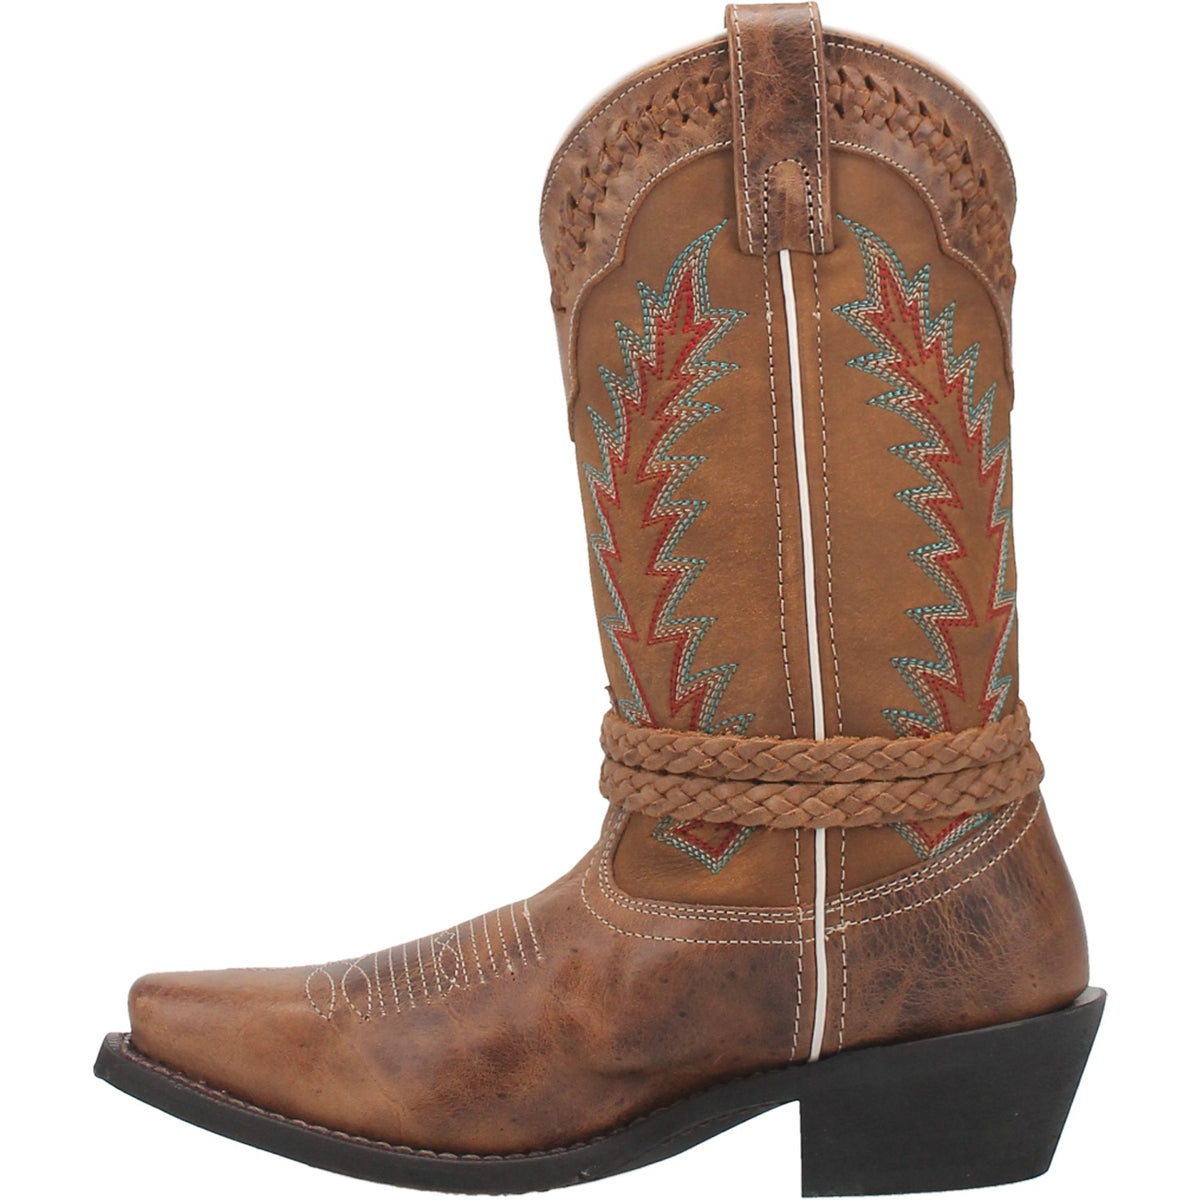 KNOT IN TIME LEATHER BOOT Cover